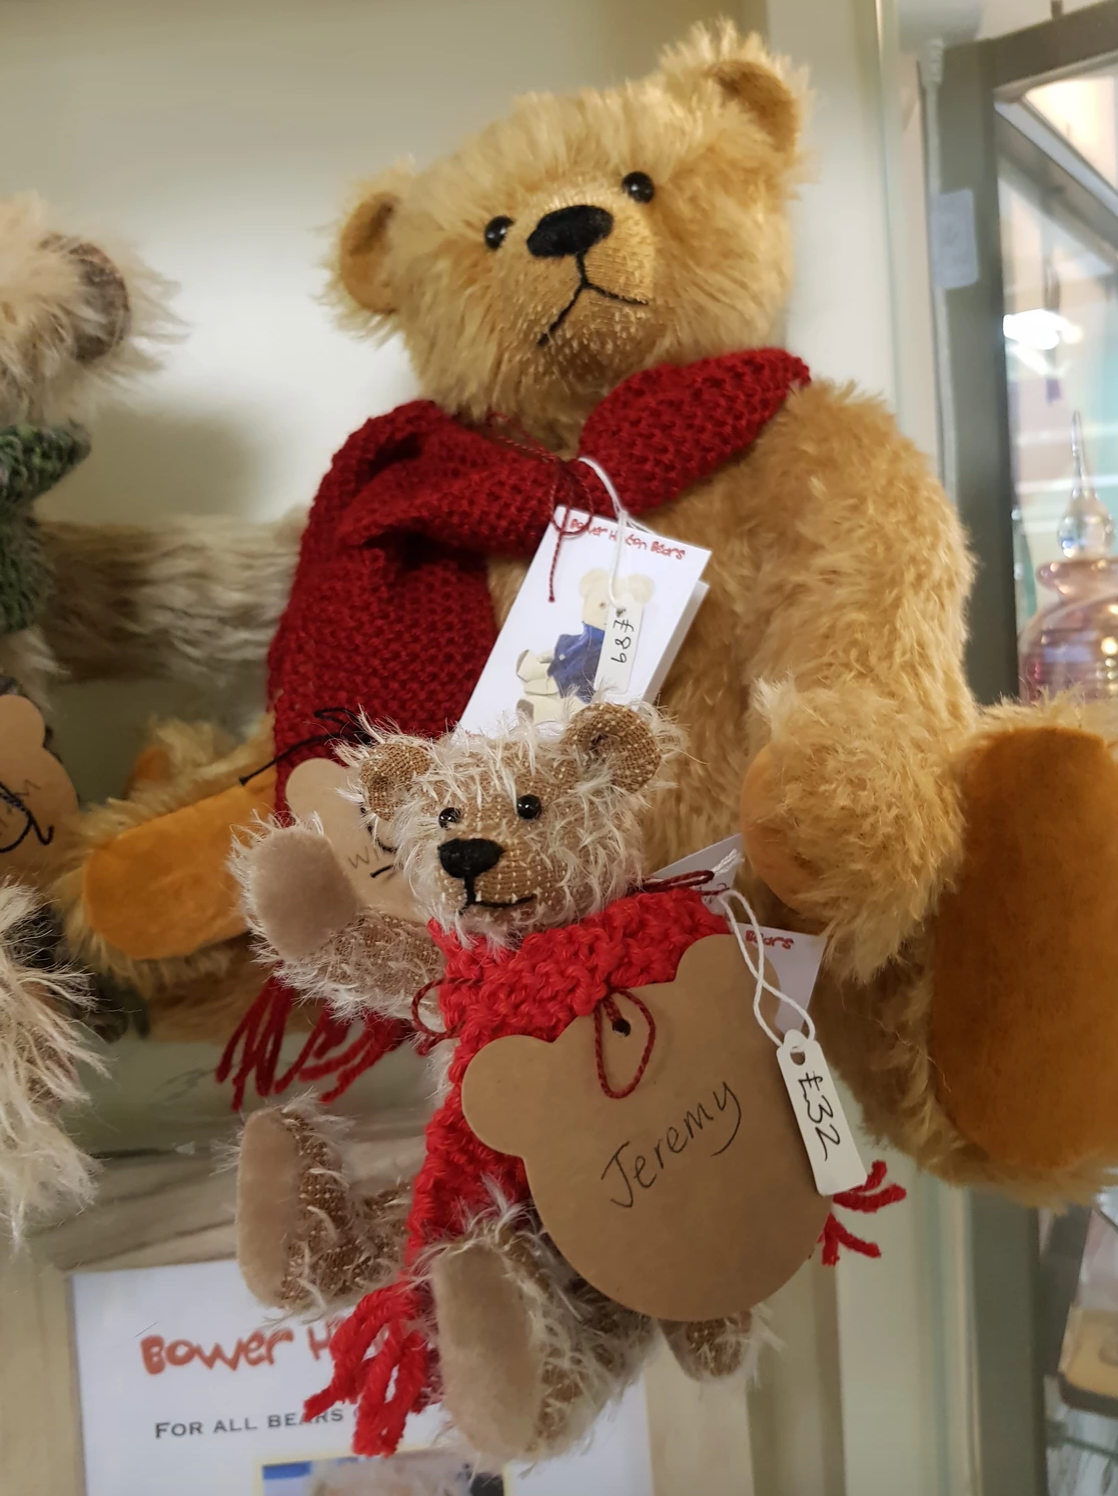 A teddy bear hospital opens in The Emporium, Yeovil!